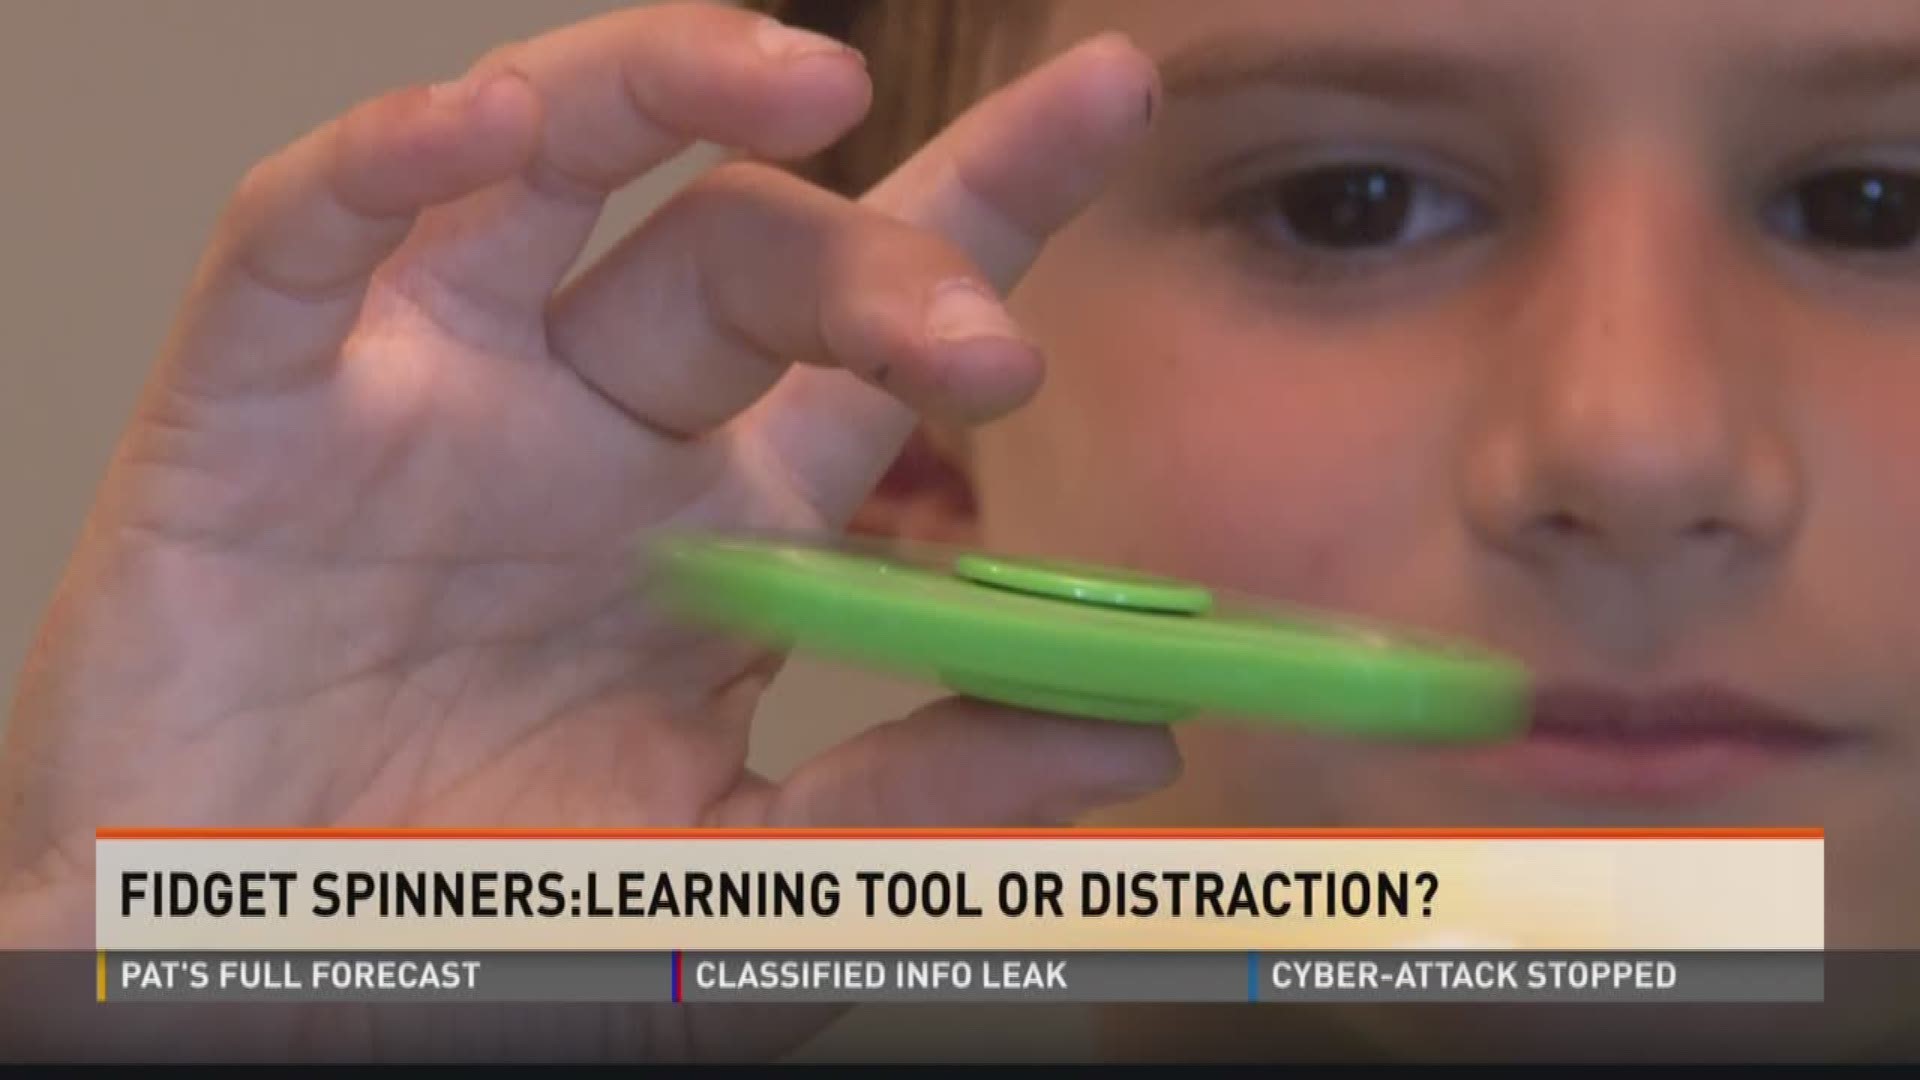 Fidget spinners: Learning tool or distraction?